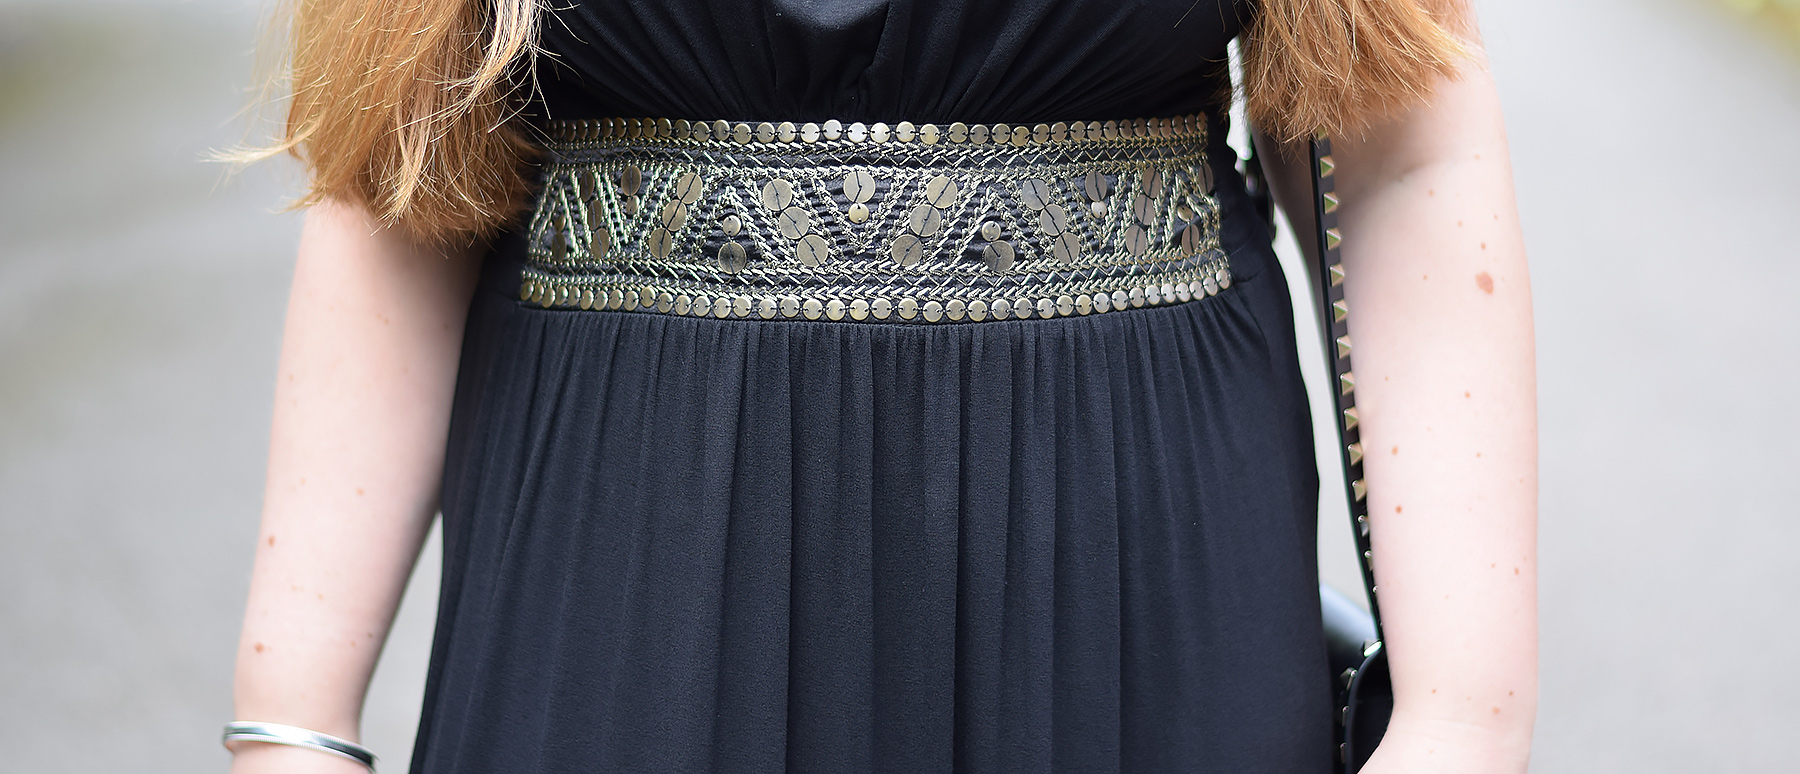 Gold Sequin Detail on Maxi Dress